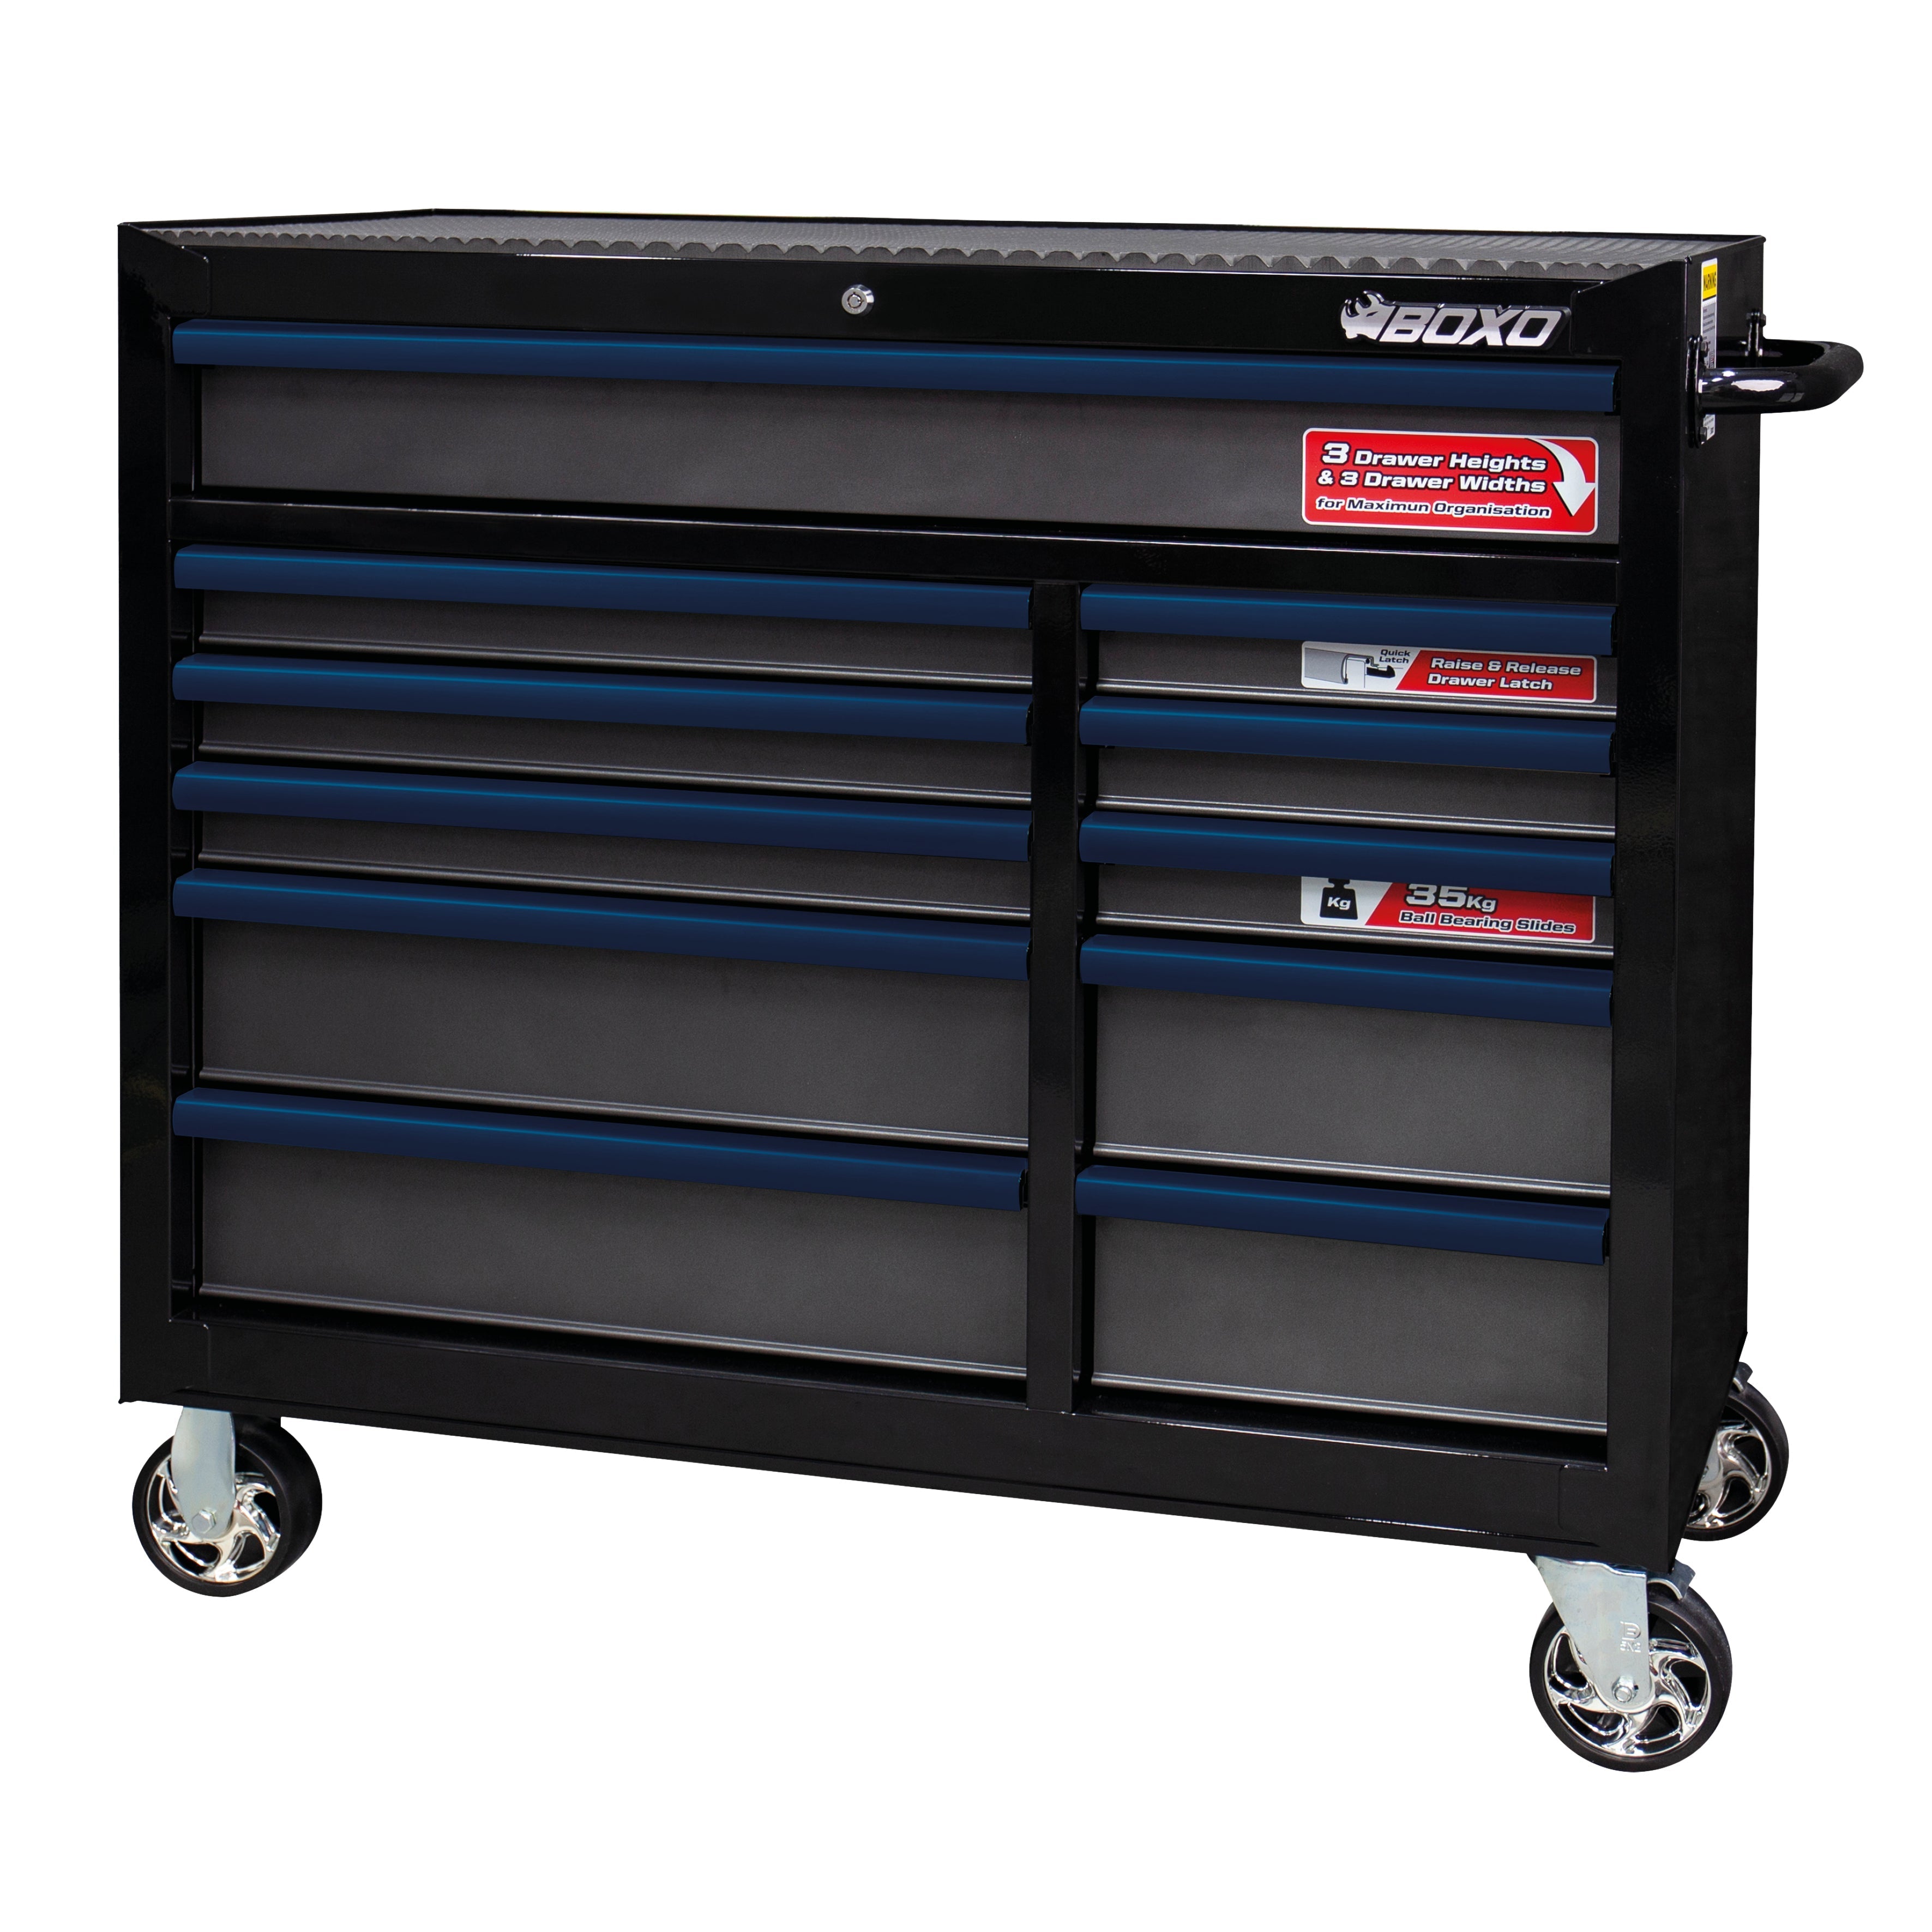 BOXO 41" 11 Drawer Roll Cabinet with Drawer Trim Pack - Black Body & Trim Colour Options